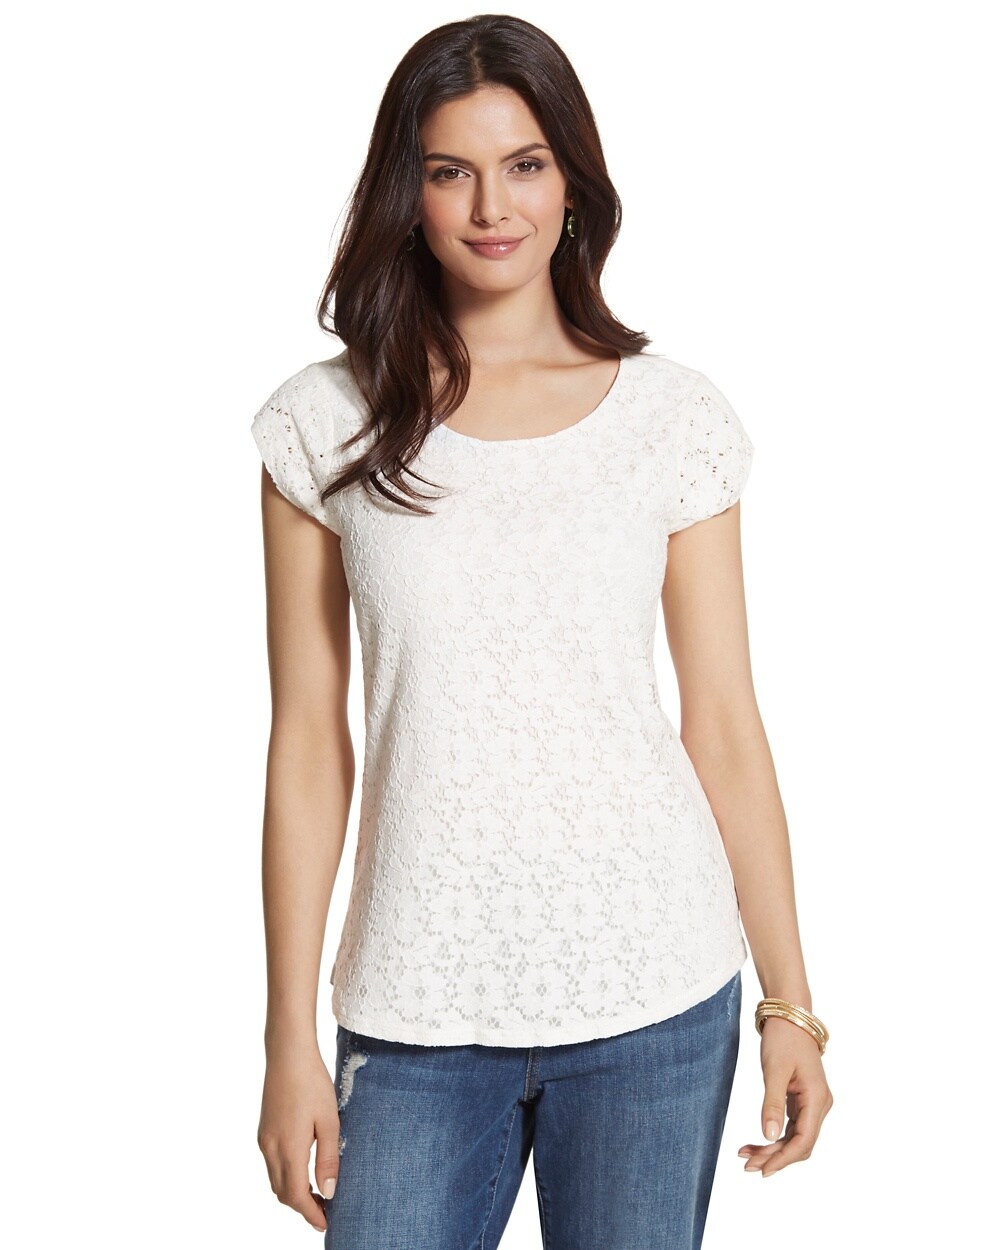 Lace Flowers Kayce Top